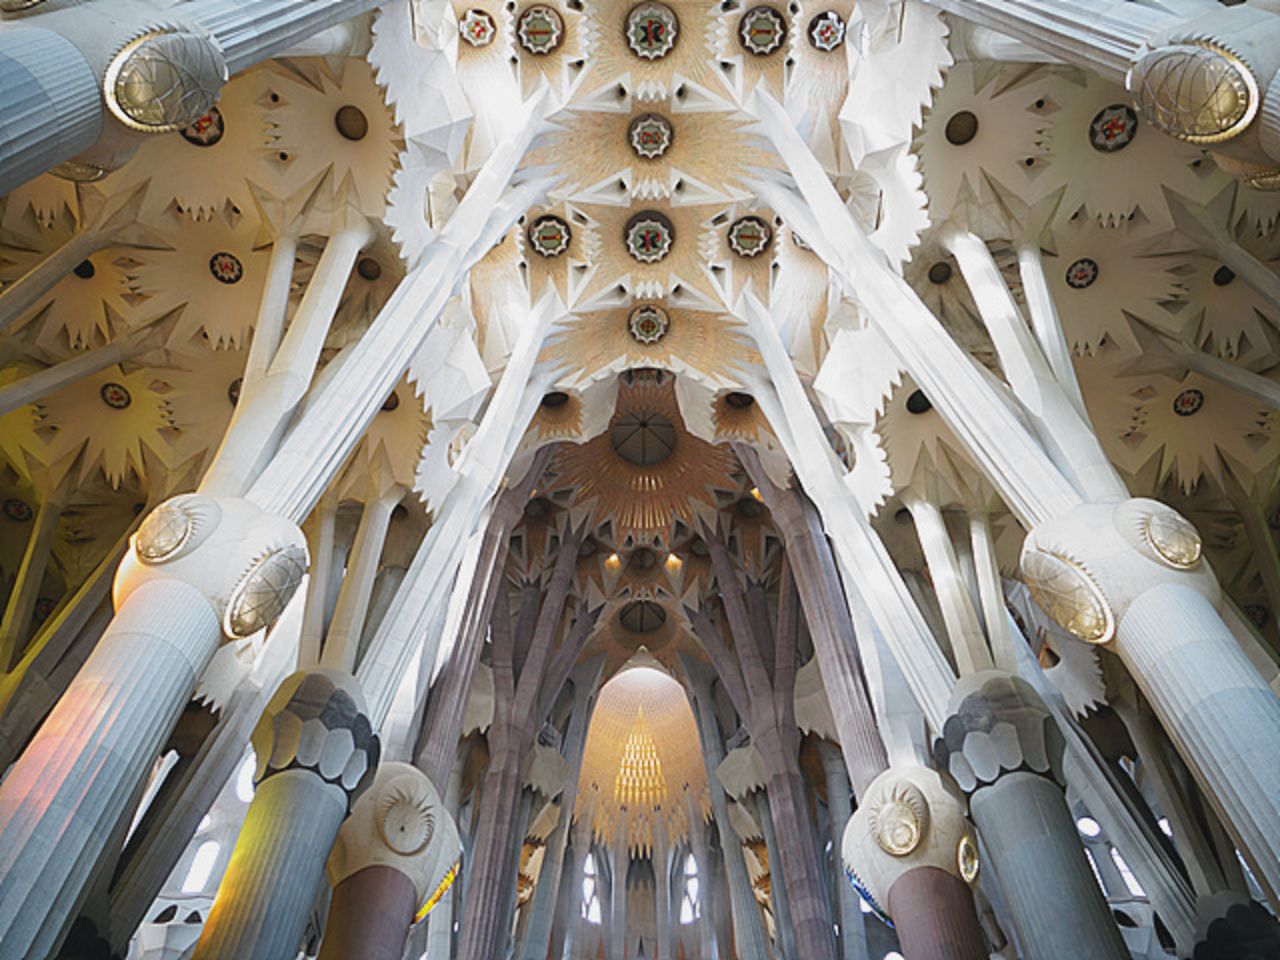 When you think "futuristic buildings," a large Roman Catholic church might not come to mind. But <a href="http://ireport.cnn.com/docs/DOC-1135906">Timothy Holm</a> begs to differ after seeing the Basilica i Temple Expiatori de la Sagrada Familia in Barcelona, Spain. Designed by  Catalan architect Antoni Gaudi in the 1880s, the building has yet to be completed. The anticipated finish date is 2026, the 100th anniversary of the architect's death.